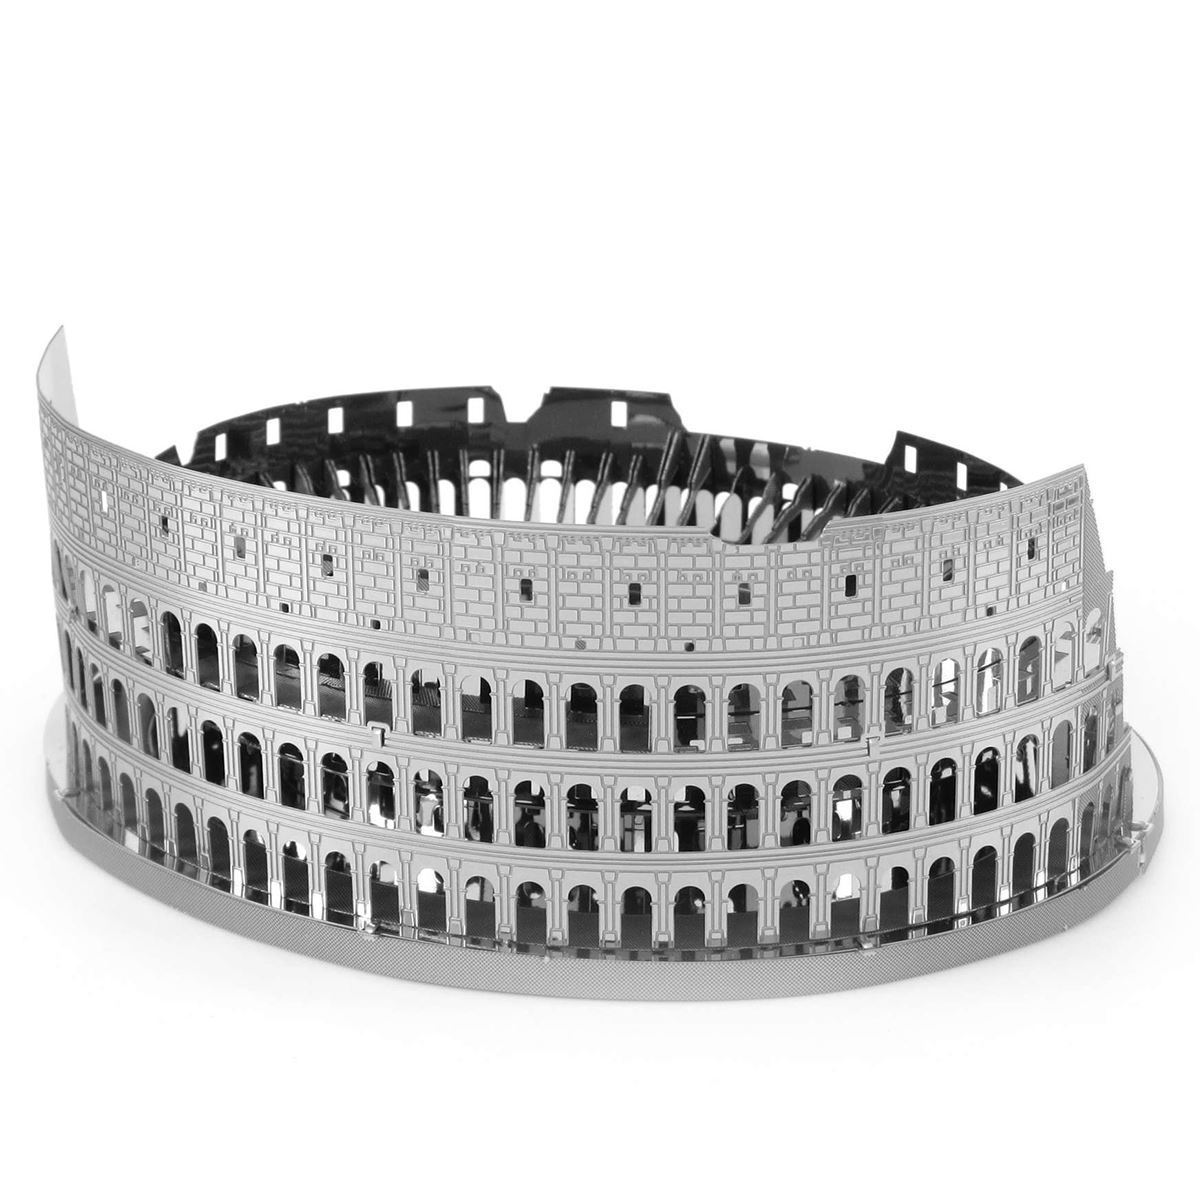 Fascinations Metal Earth ICONX Roman Colosseum 3d Model Kit ICX025 for sale online 